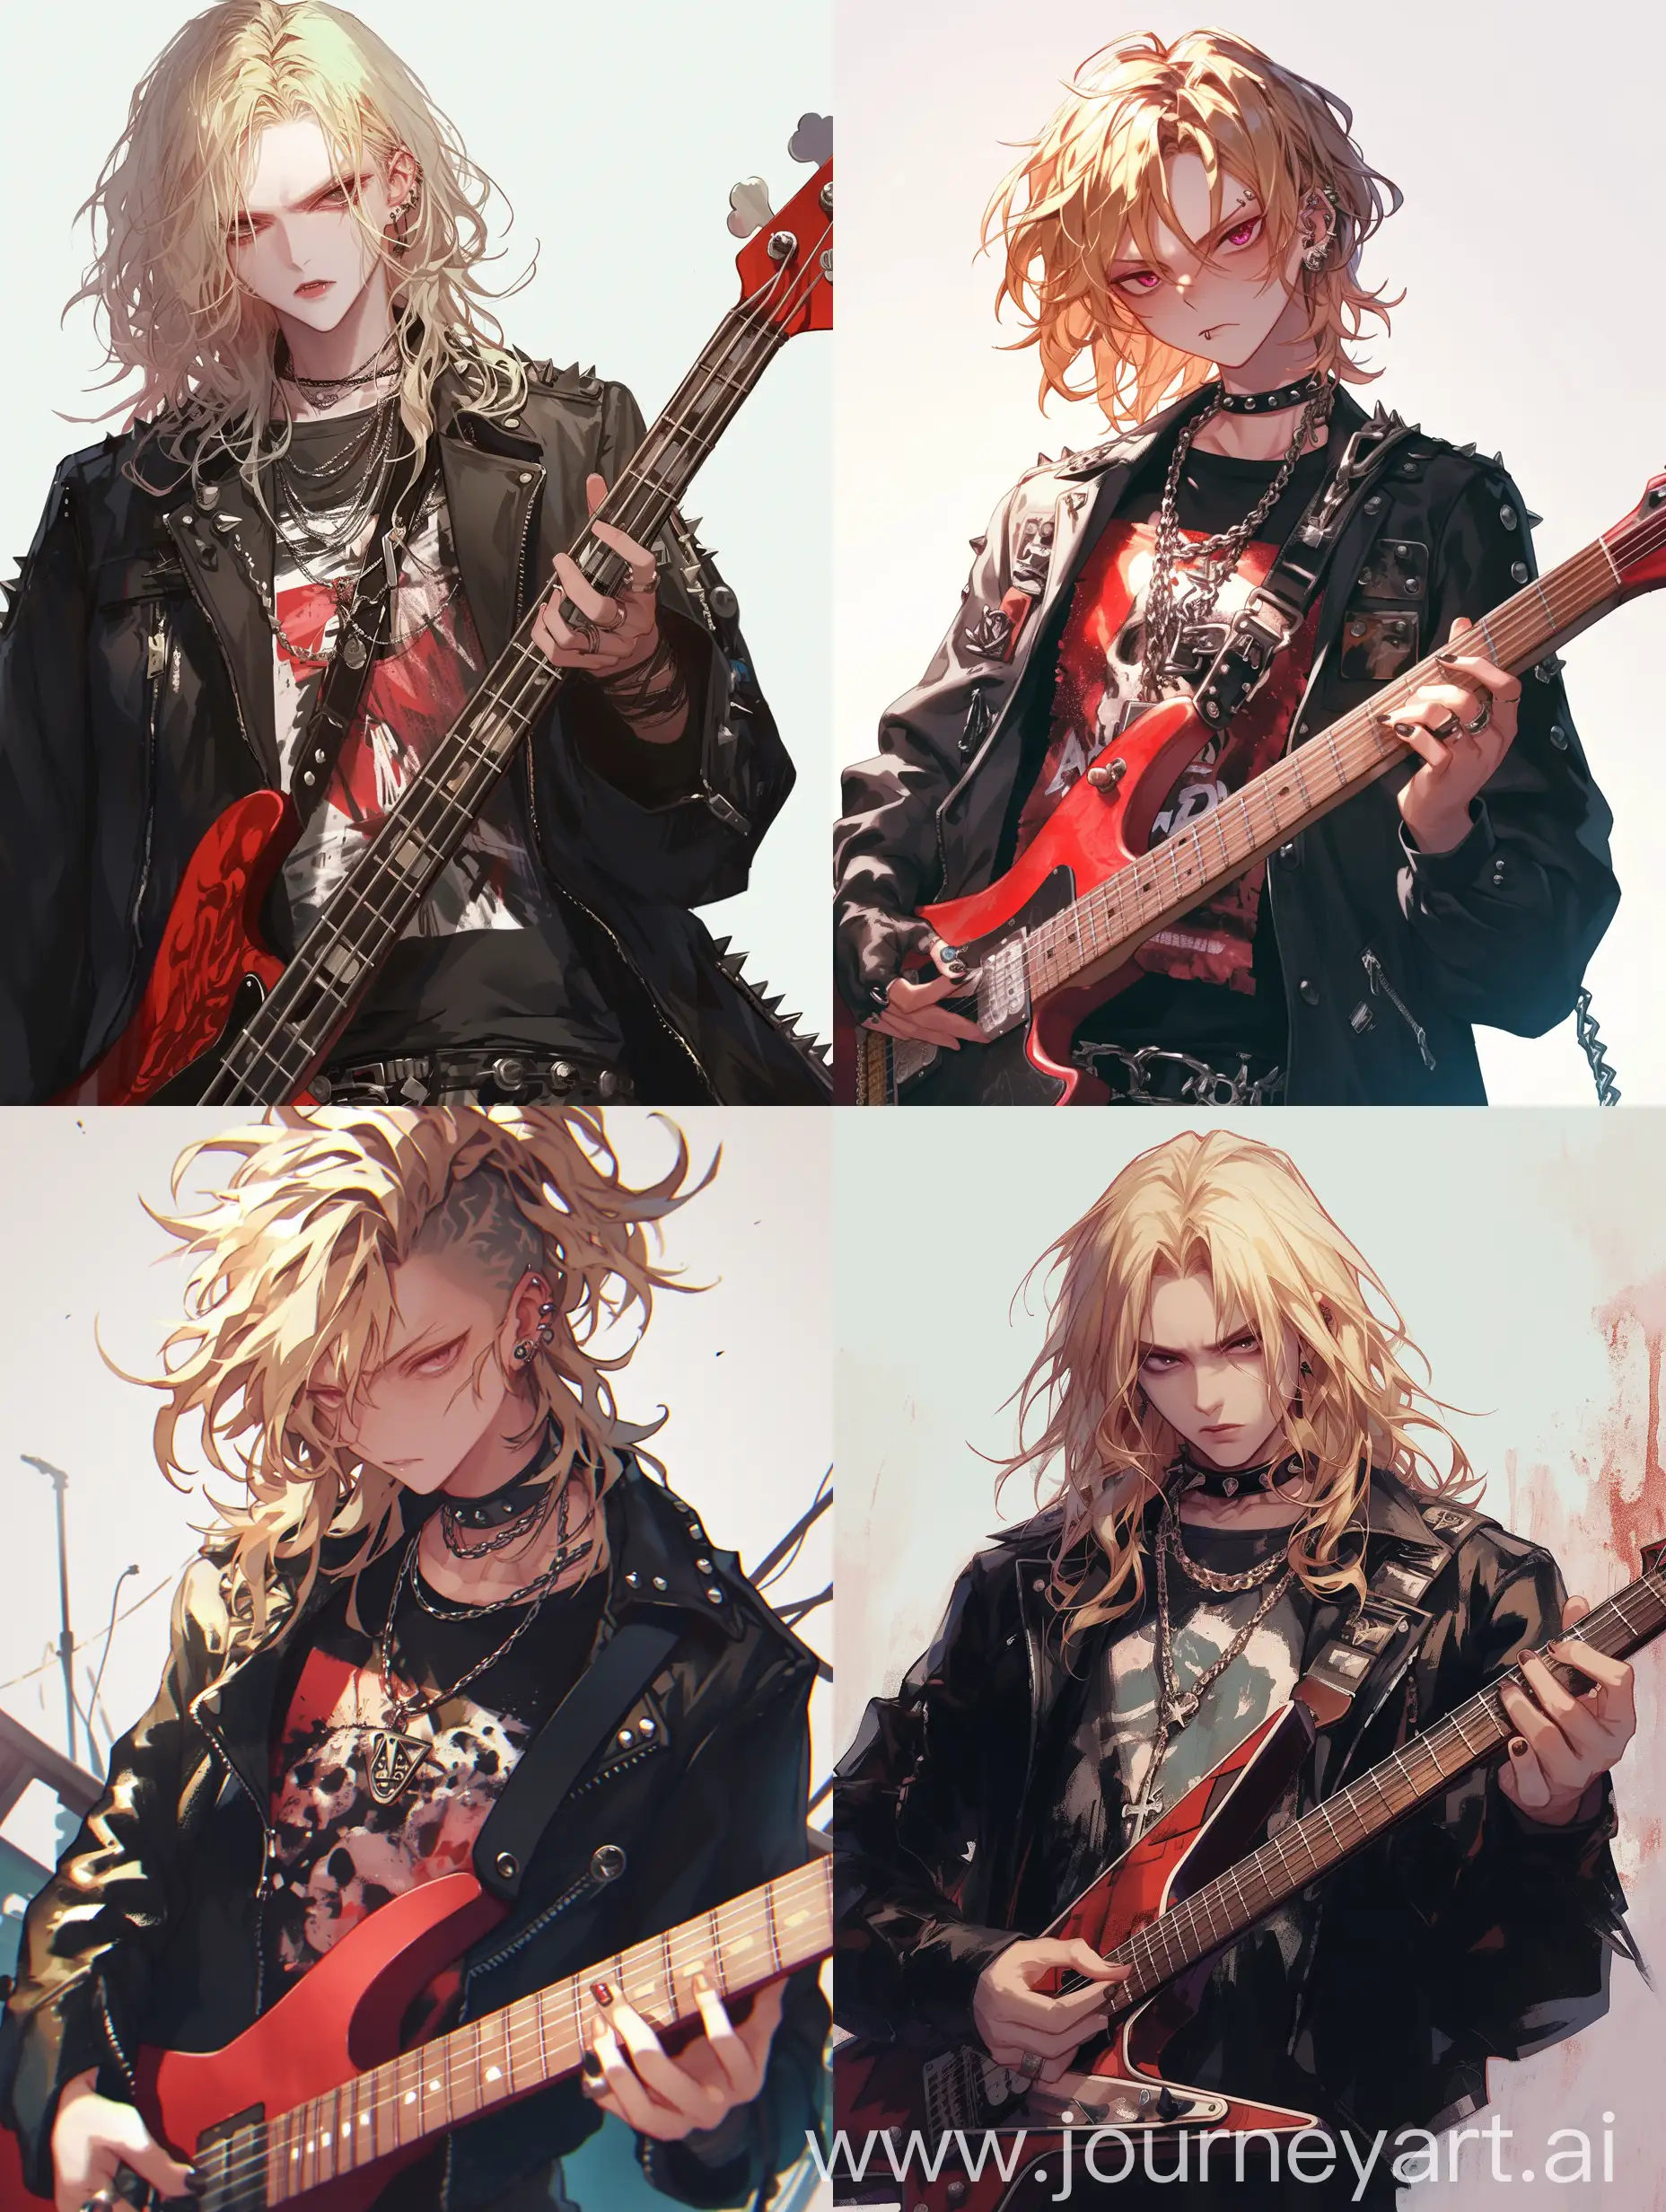 masterpiece, best quality, 1boy,  blond neck-length hair, guitarist, serious expression, punk outfit, black jacket, pierced ears, metal necklace, rock band t-shirt, holding electric guitar --niji 6